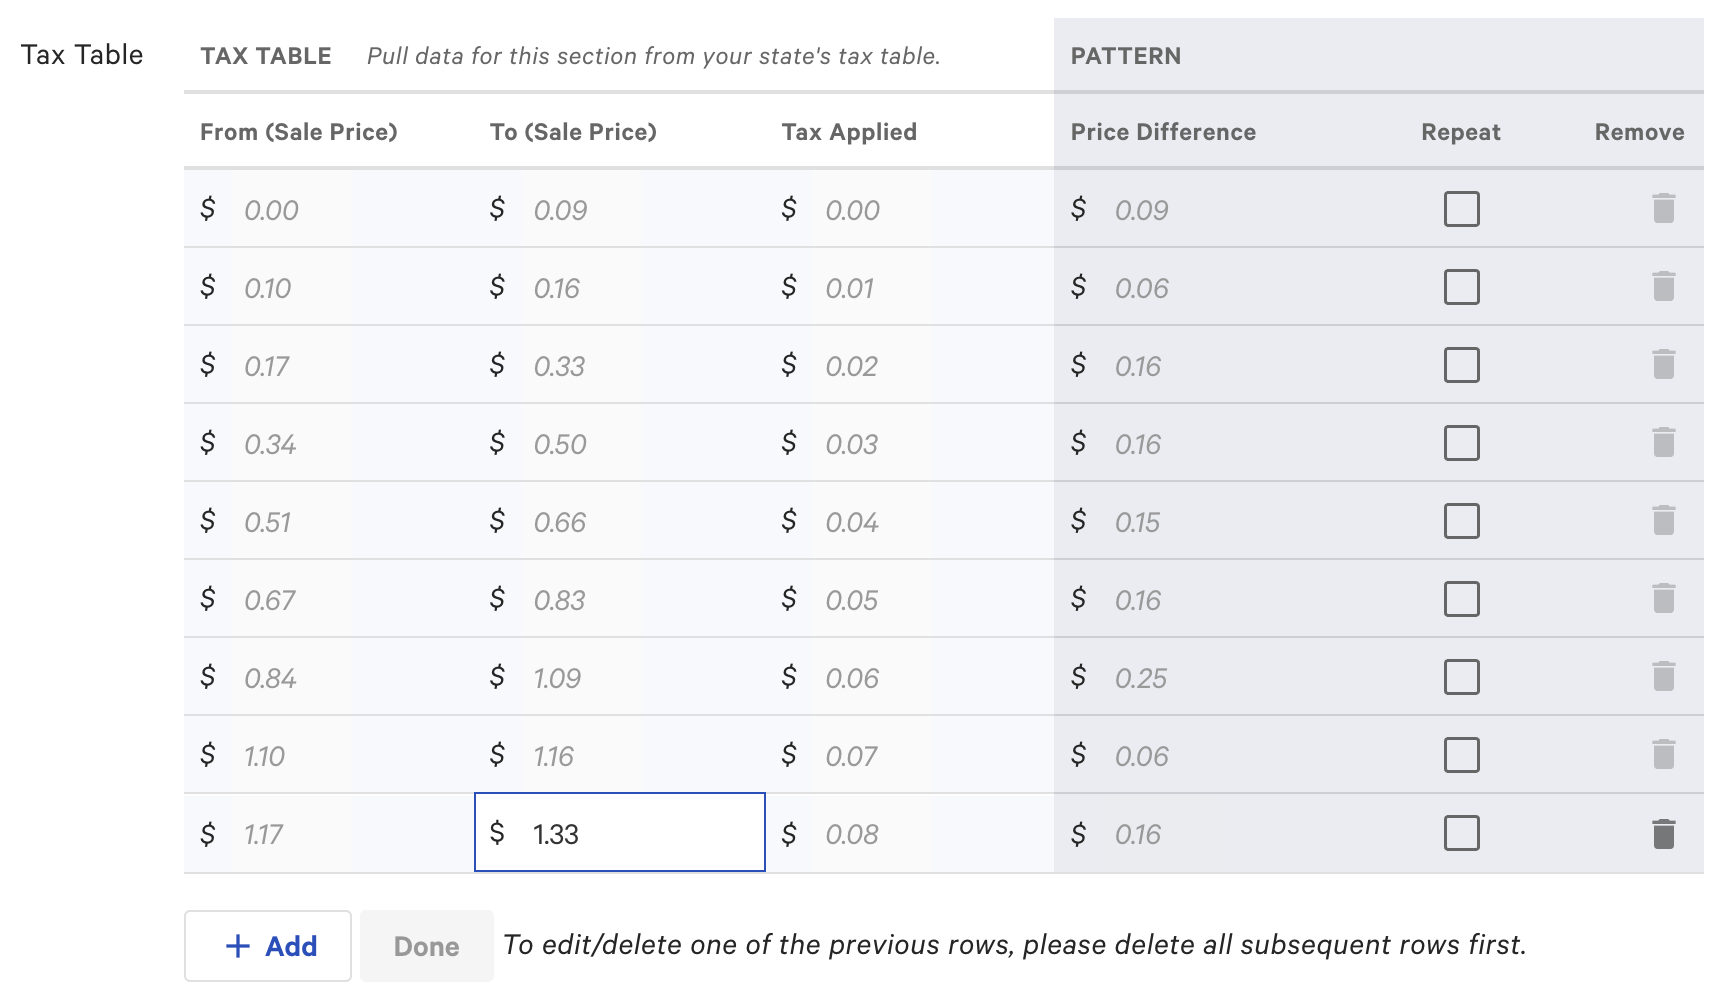 Continue adding tax brackets when building the Tax Table in the New tax rate page.